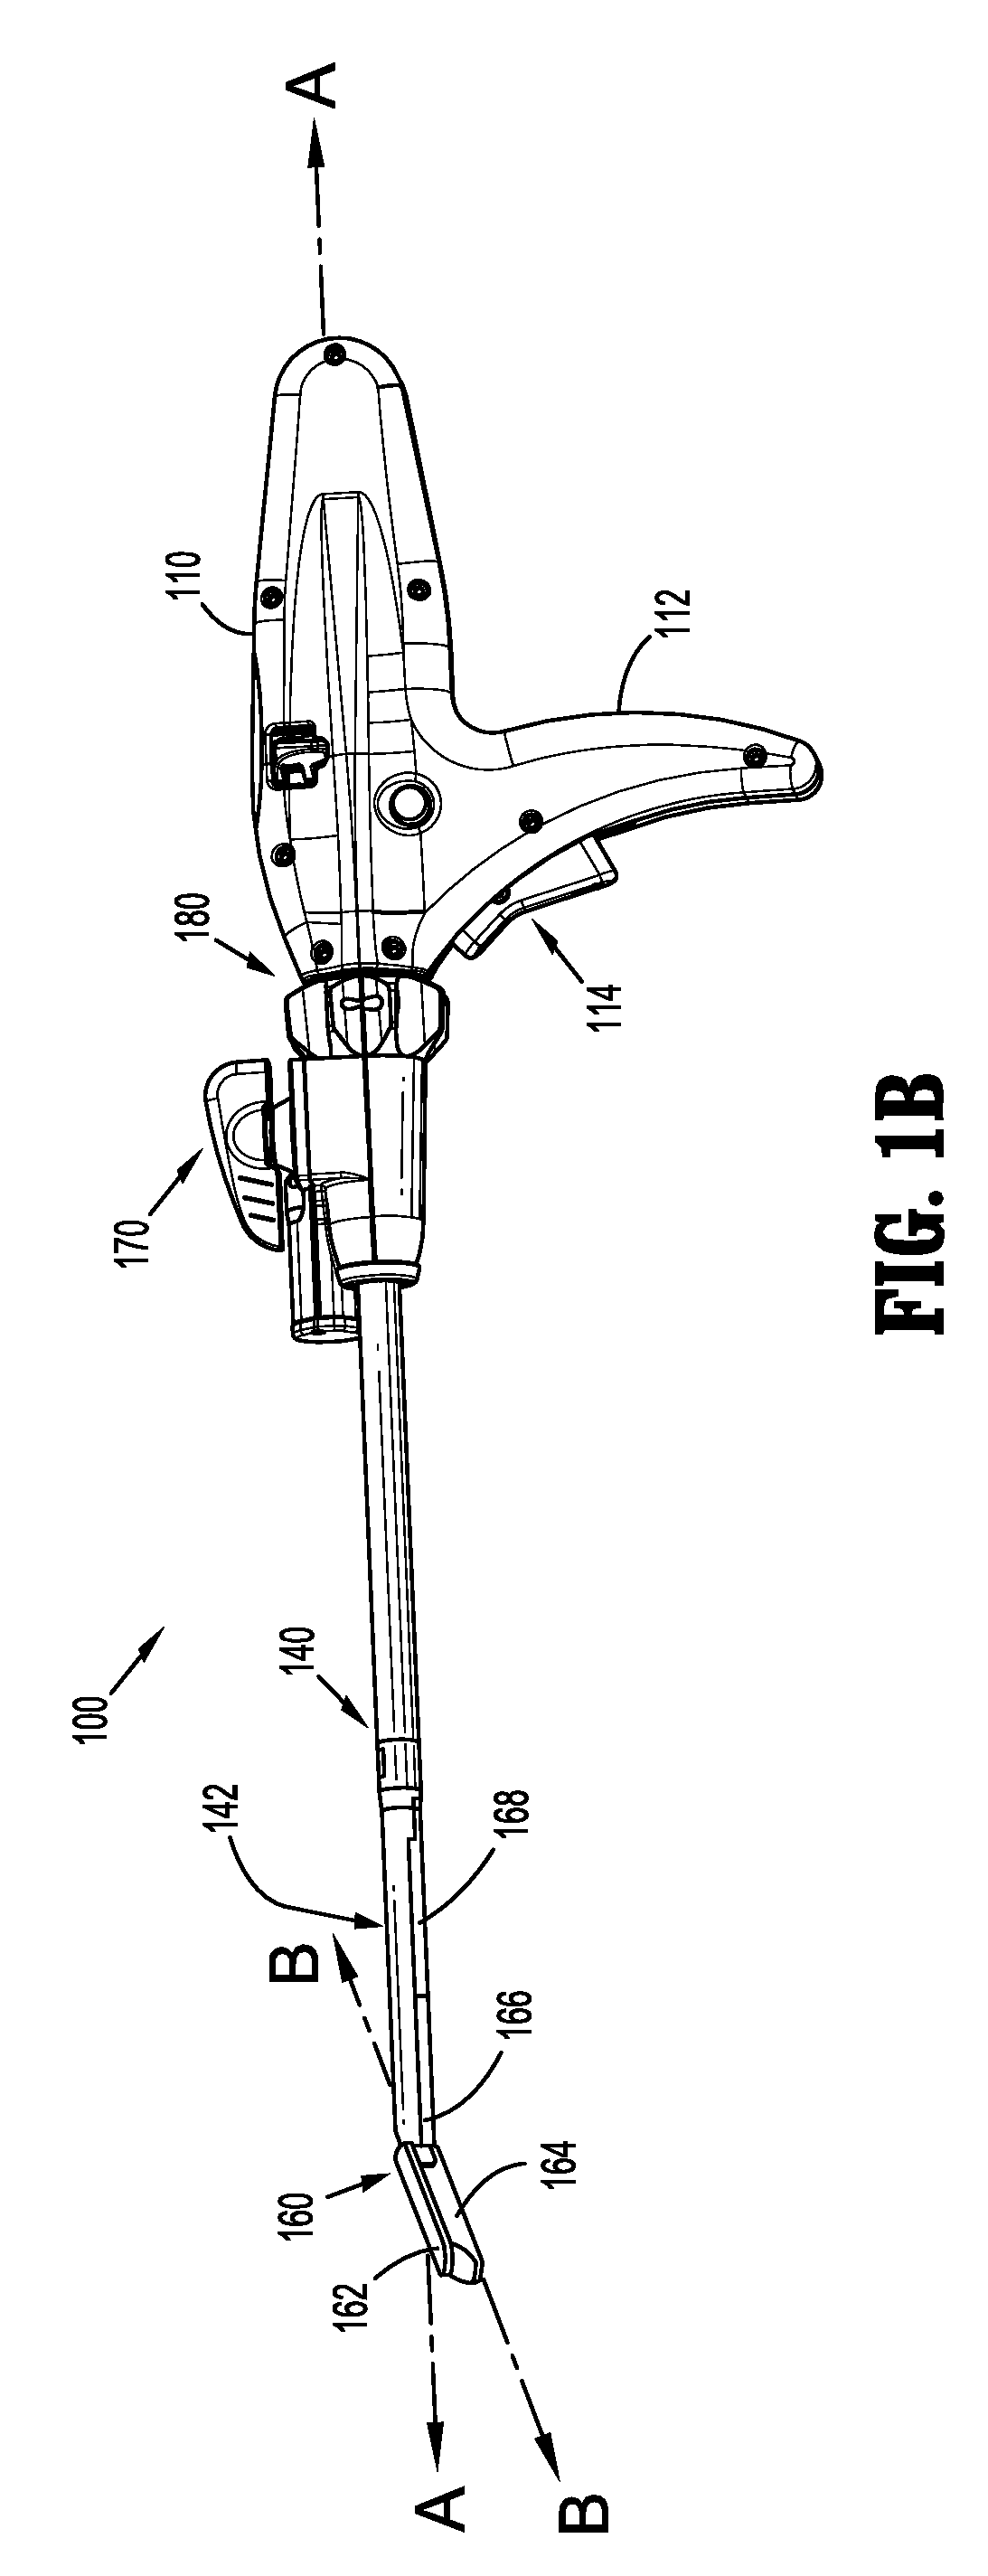 System and method of using simulation reload to optimize staple formation